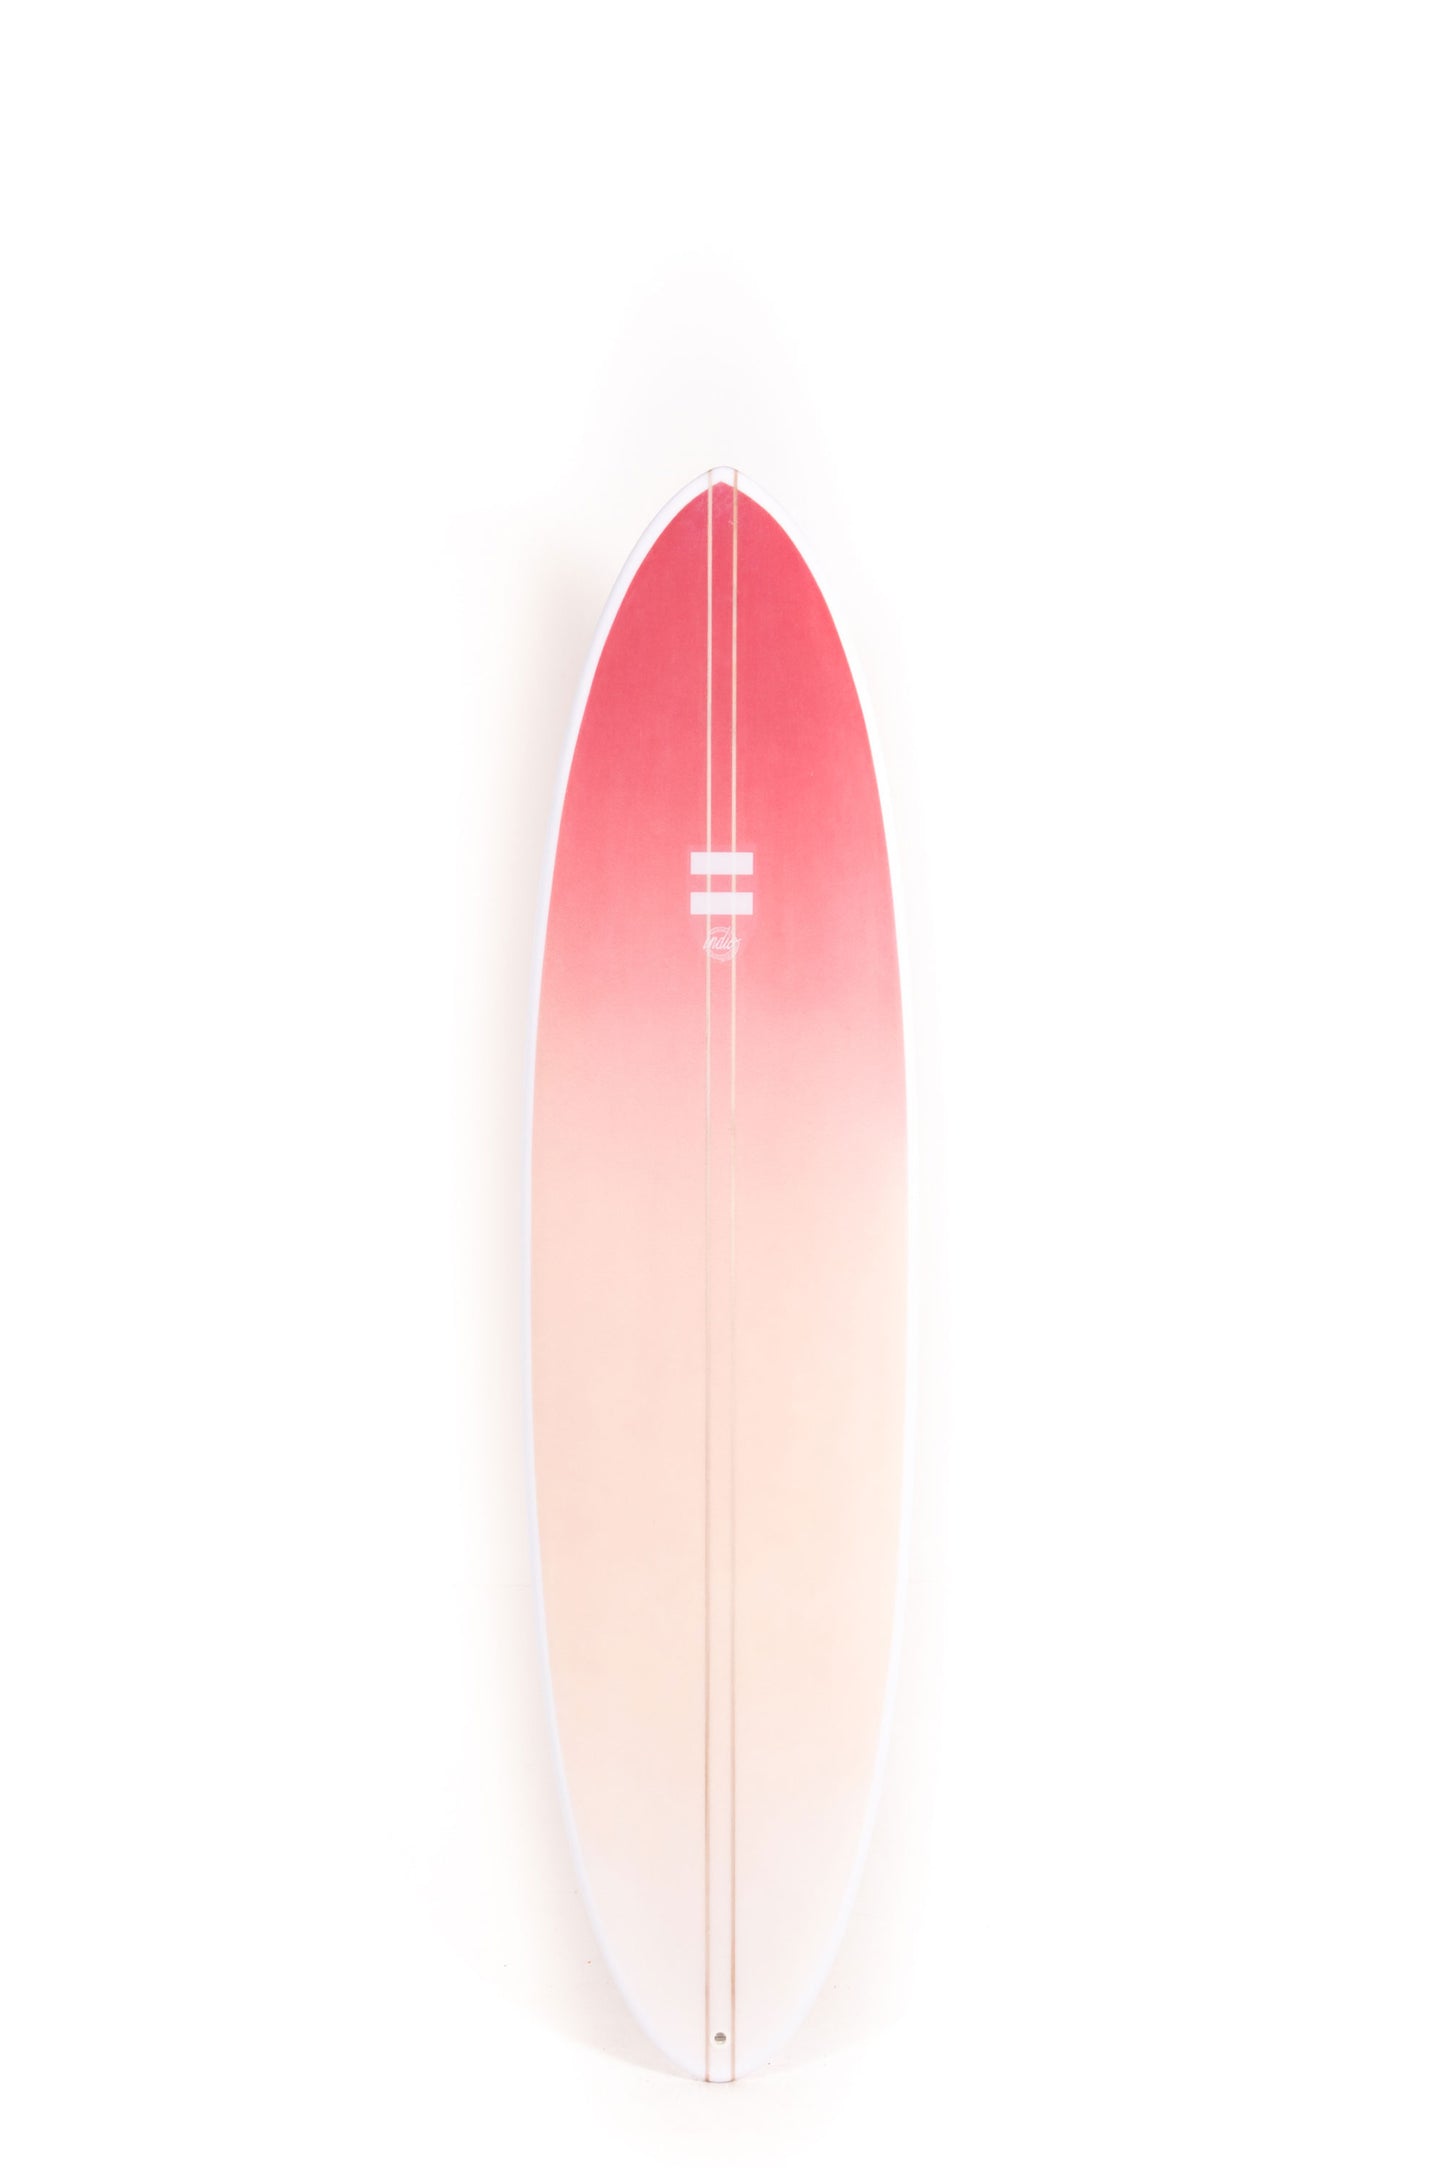 Pukas-Surf-Shop-Indio-Surfboards-The-Egg-red-7_2